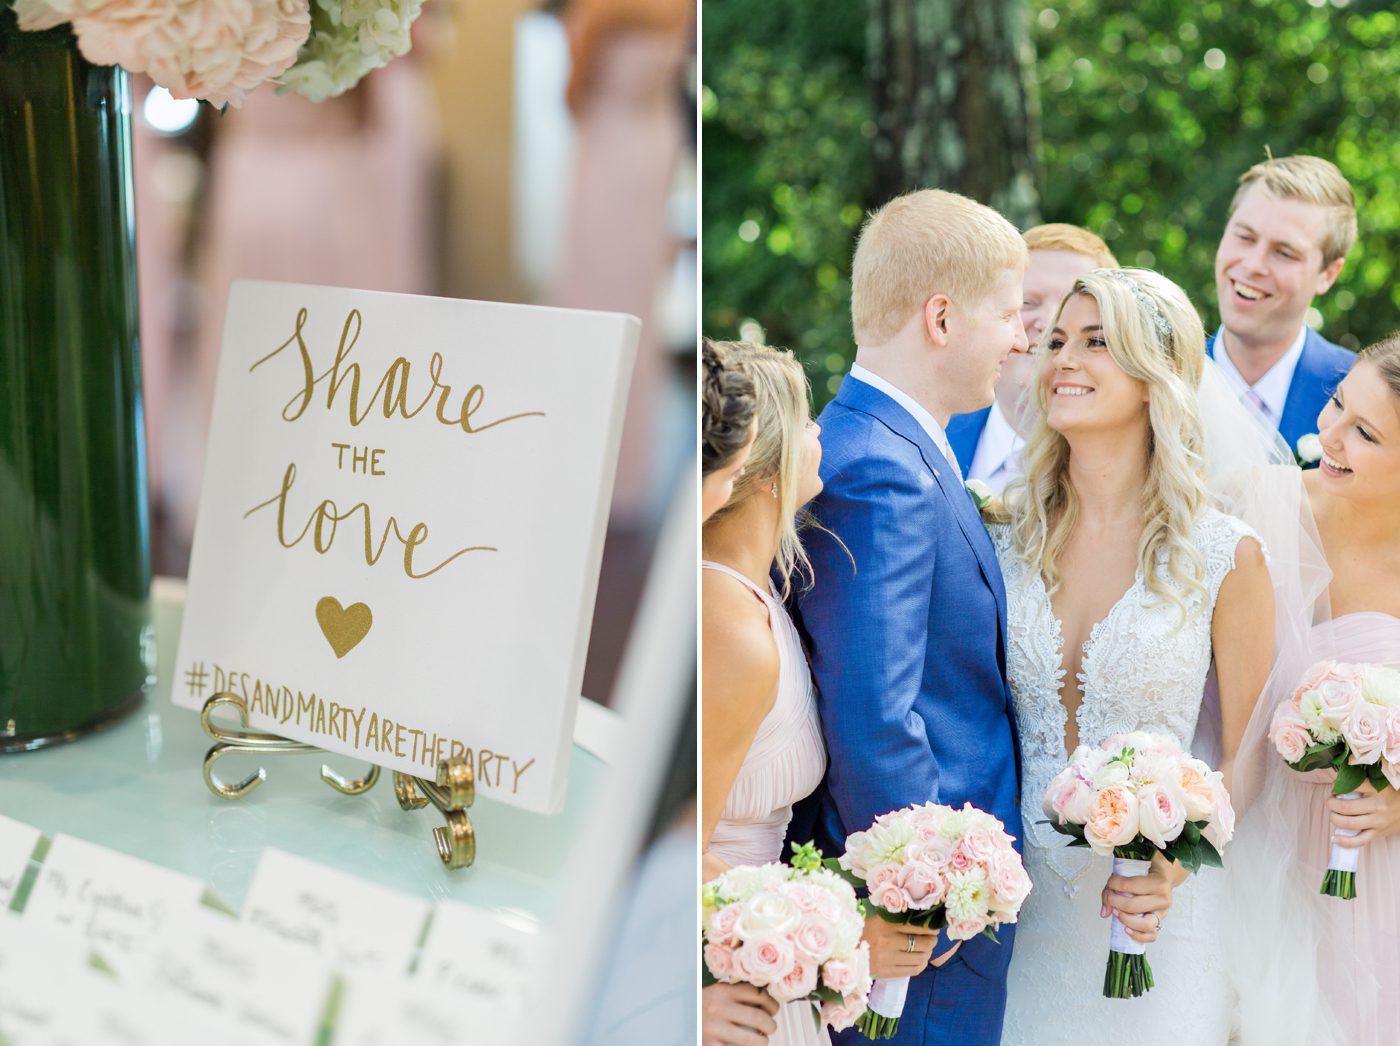 Calligraphy share the love sign at wedding reception